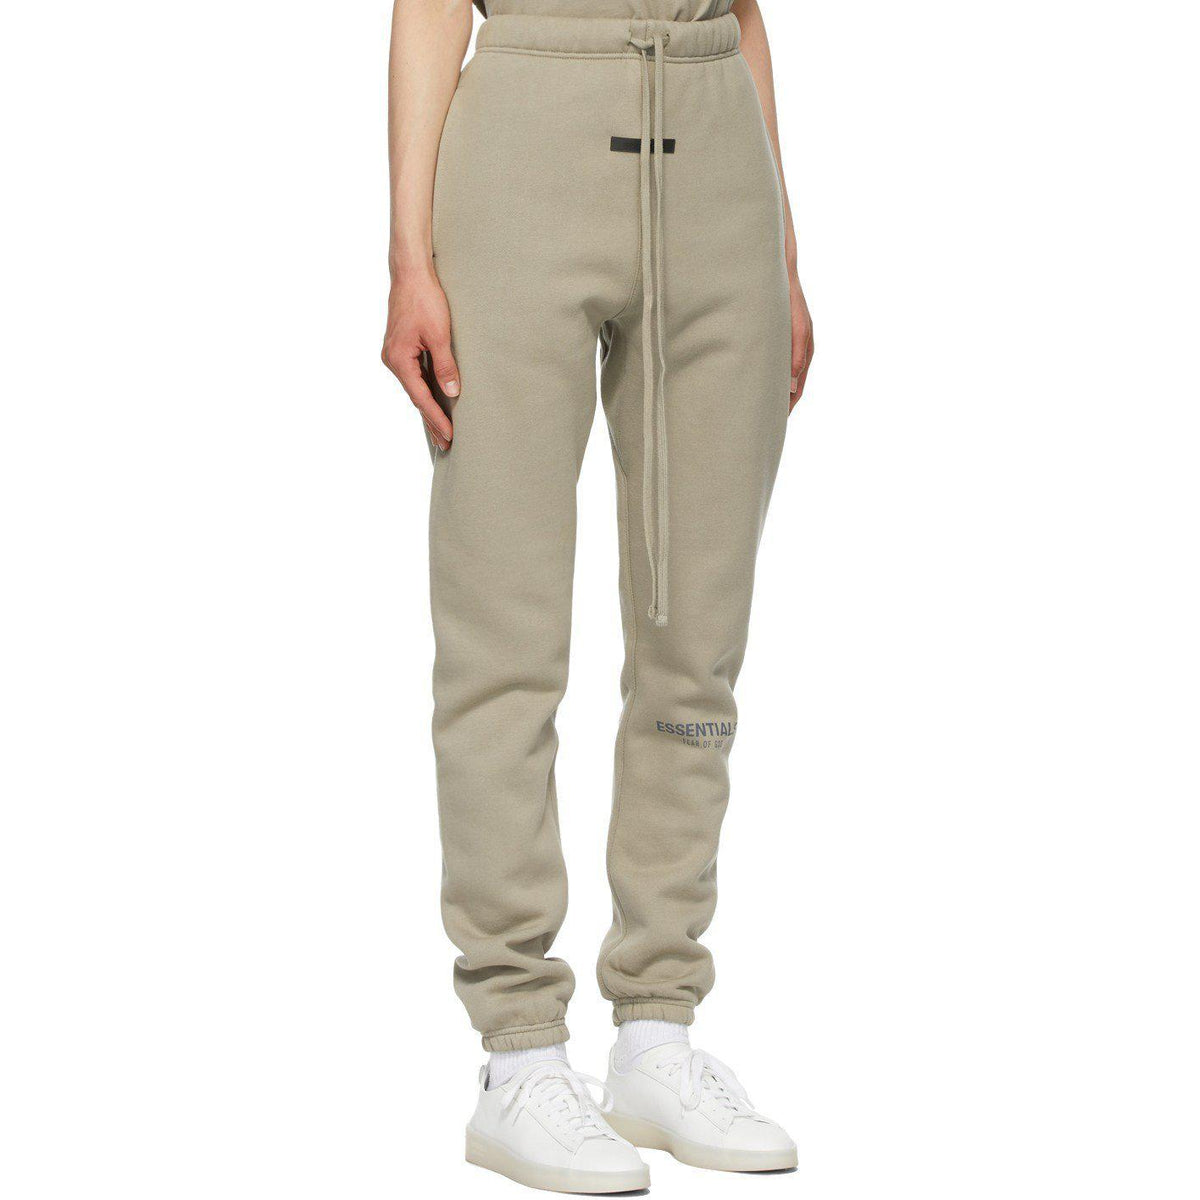 FEAR OF GOD ESSENTIALS Sweatpants (Moss) SS21 | Waves Never Die | Fear of God | Pants